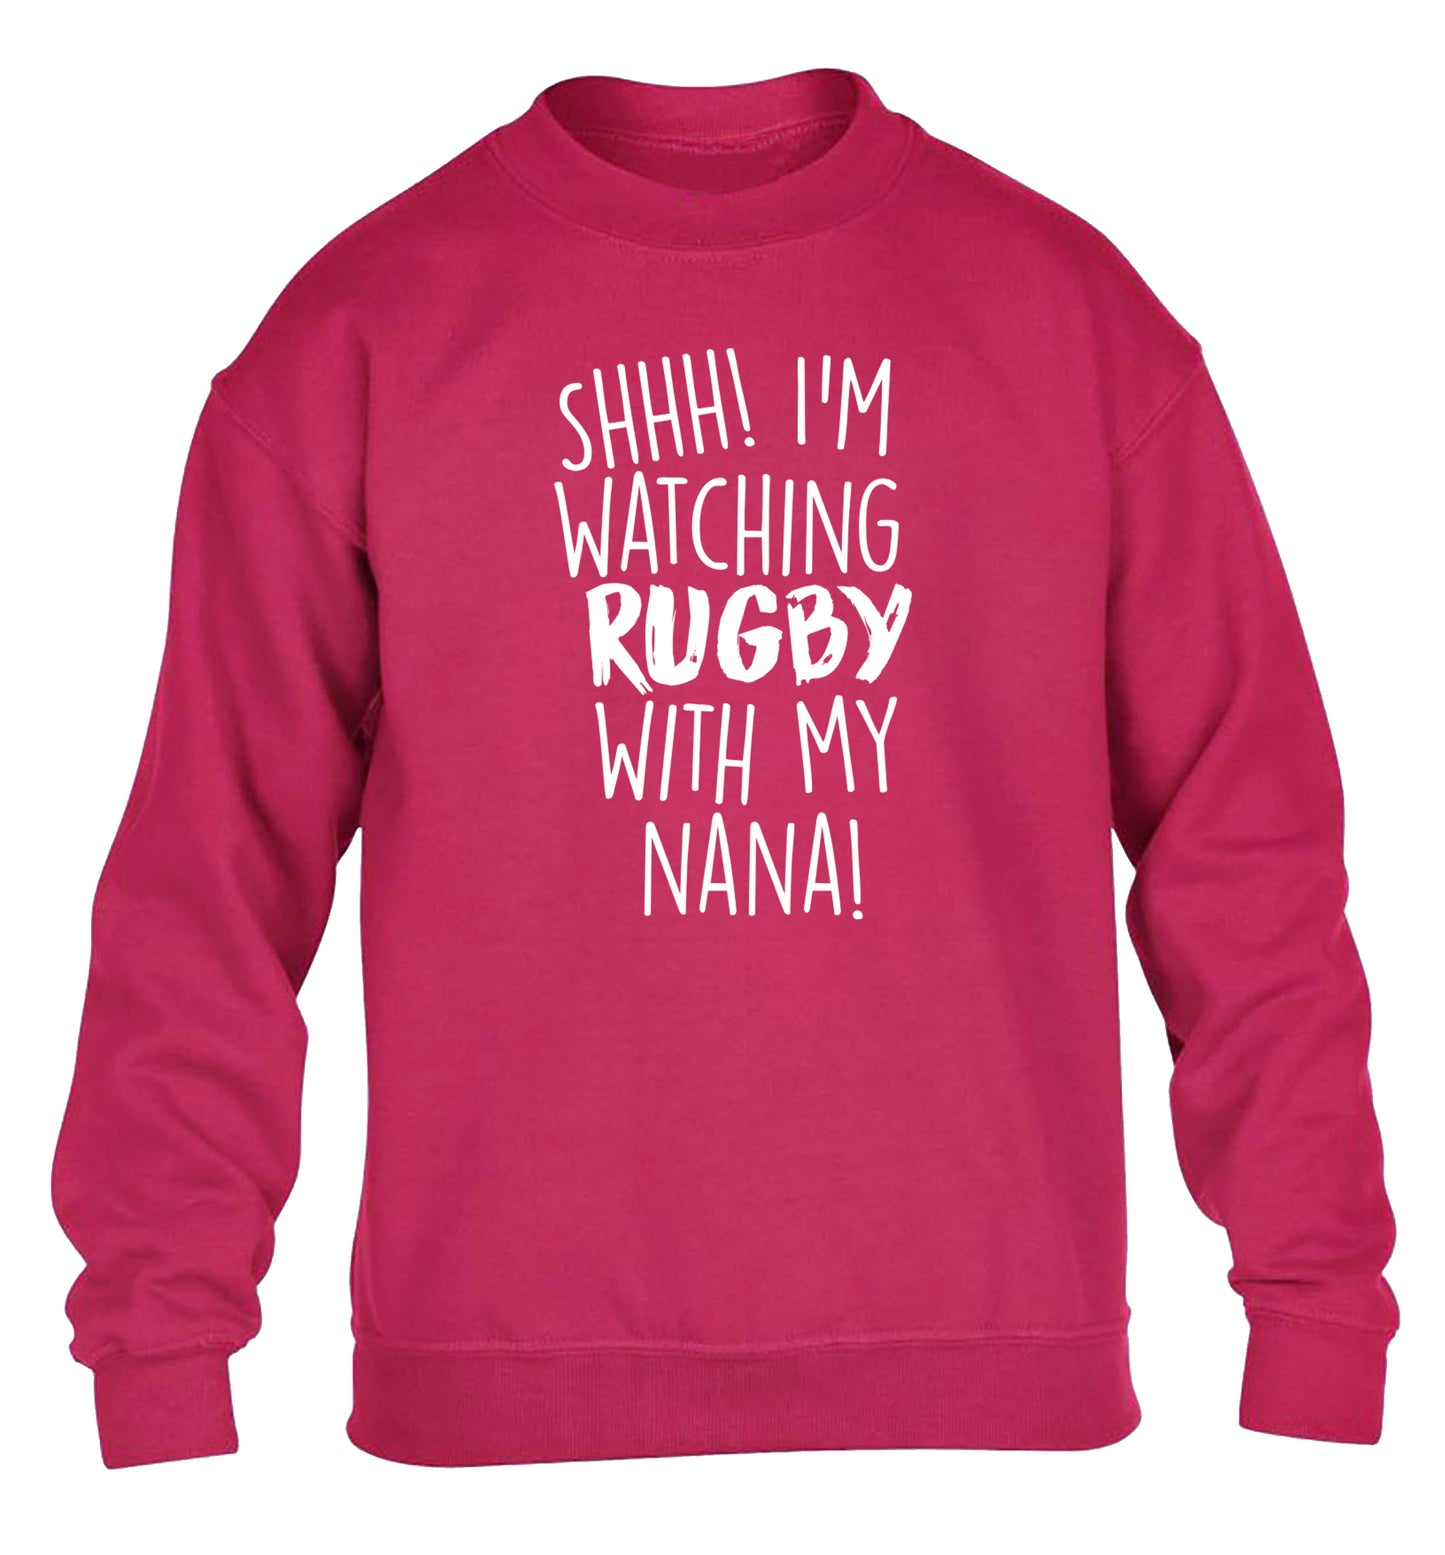 Shh I'm watching rugby with my nana children's pink sweater 12-13 Years